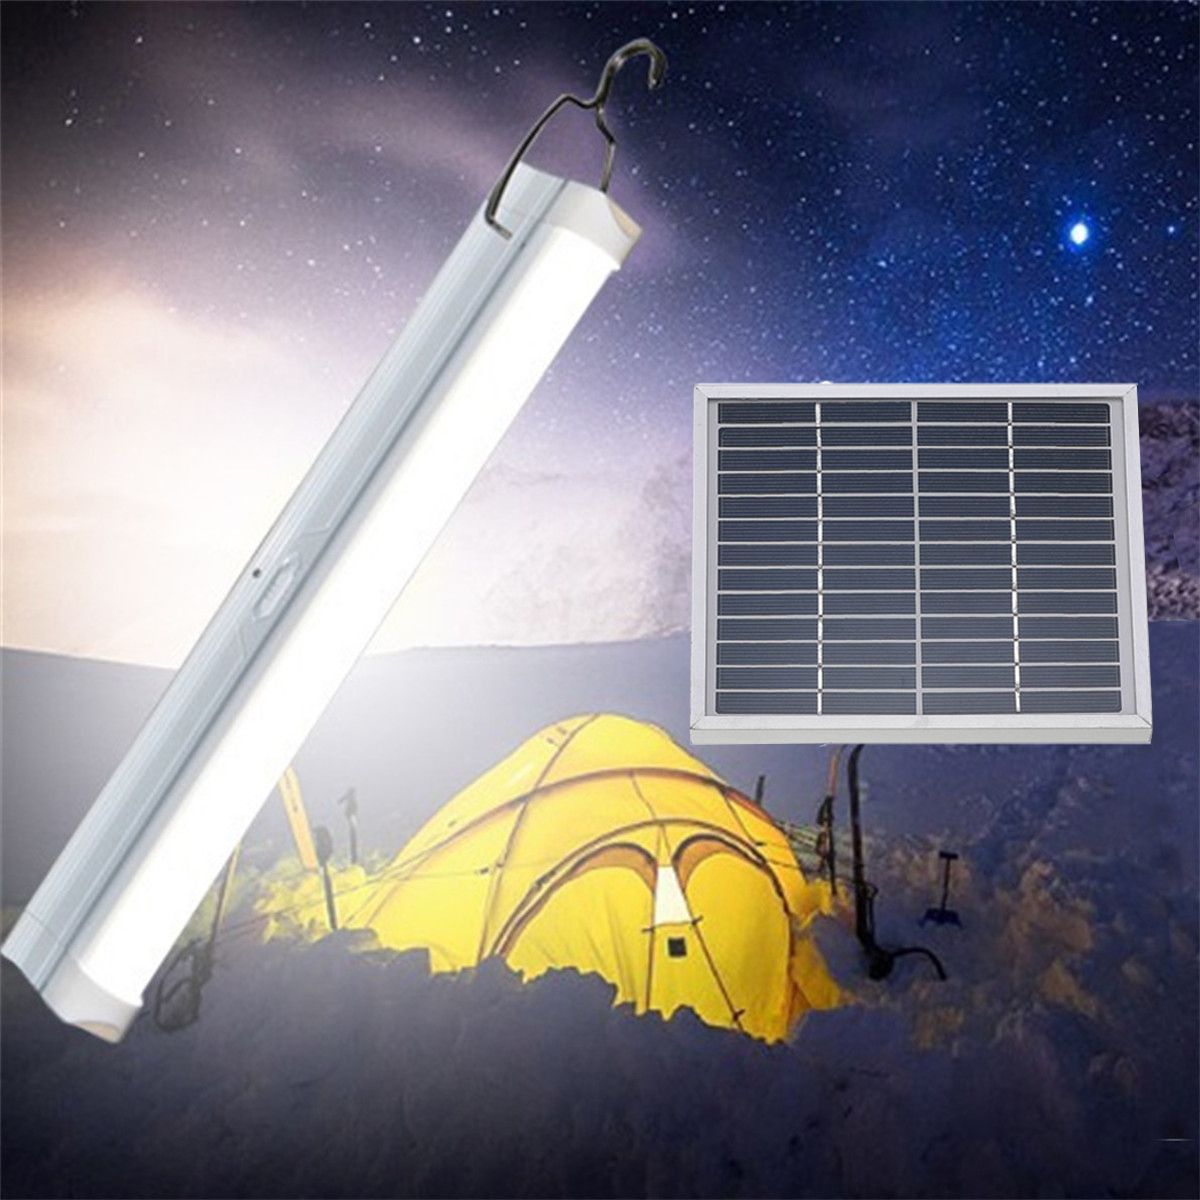 Solar-Powered-30-LED-Light-Bar-Home-Room-Camping-Outdoor-Garden-Hanging-Lamp-With-Remote-Control-1345077